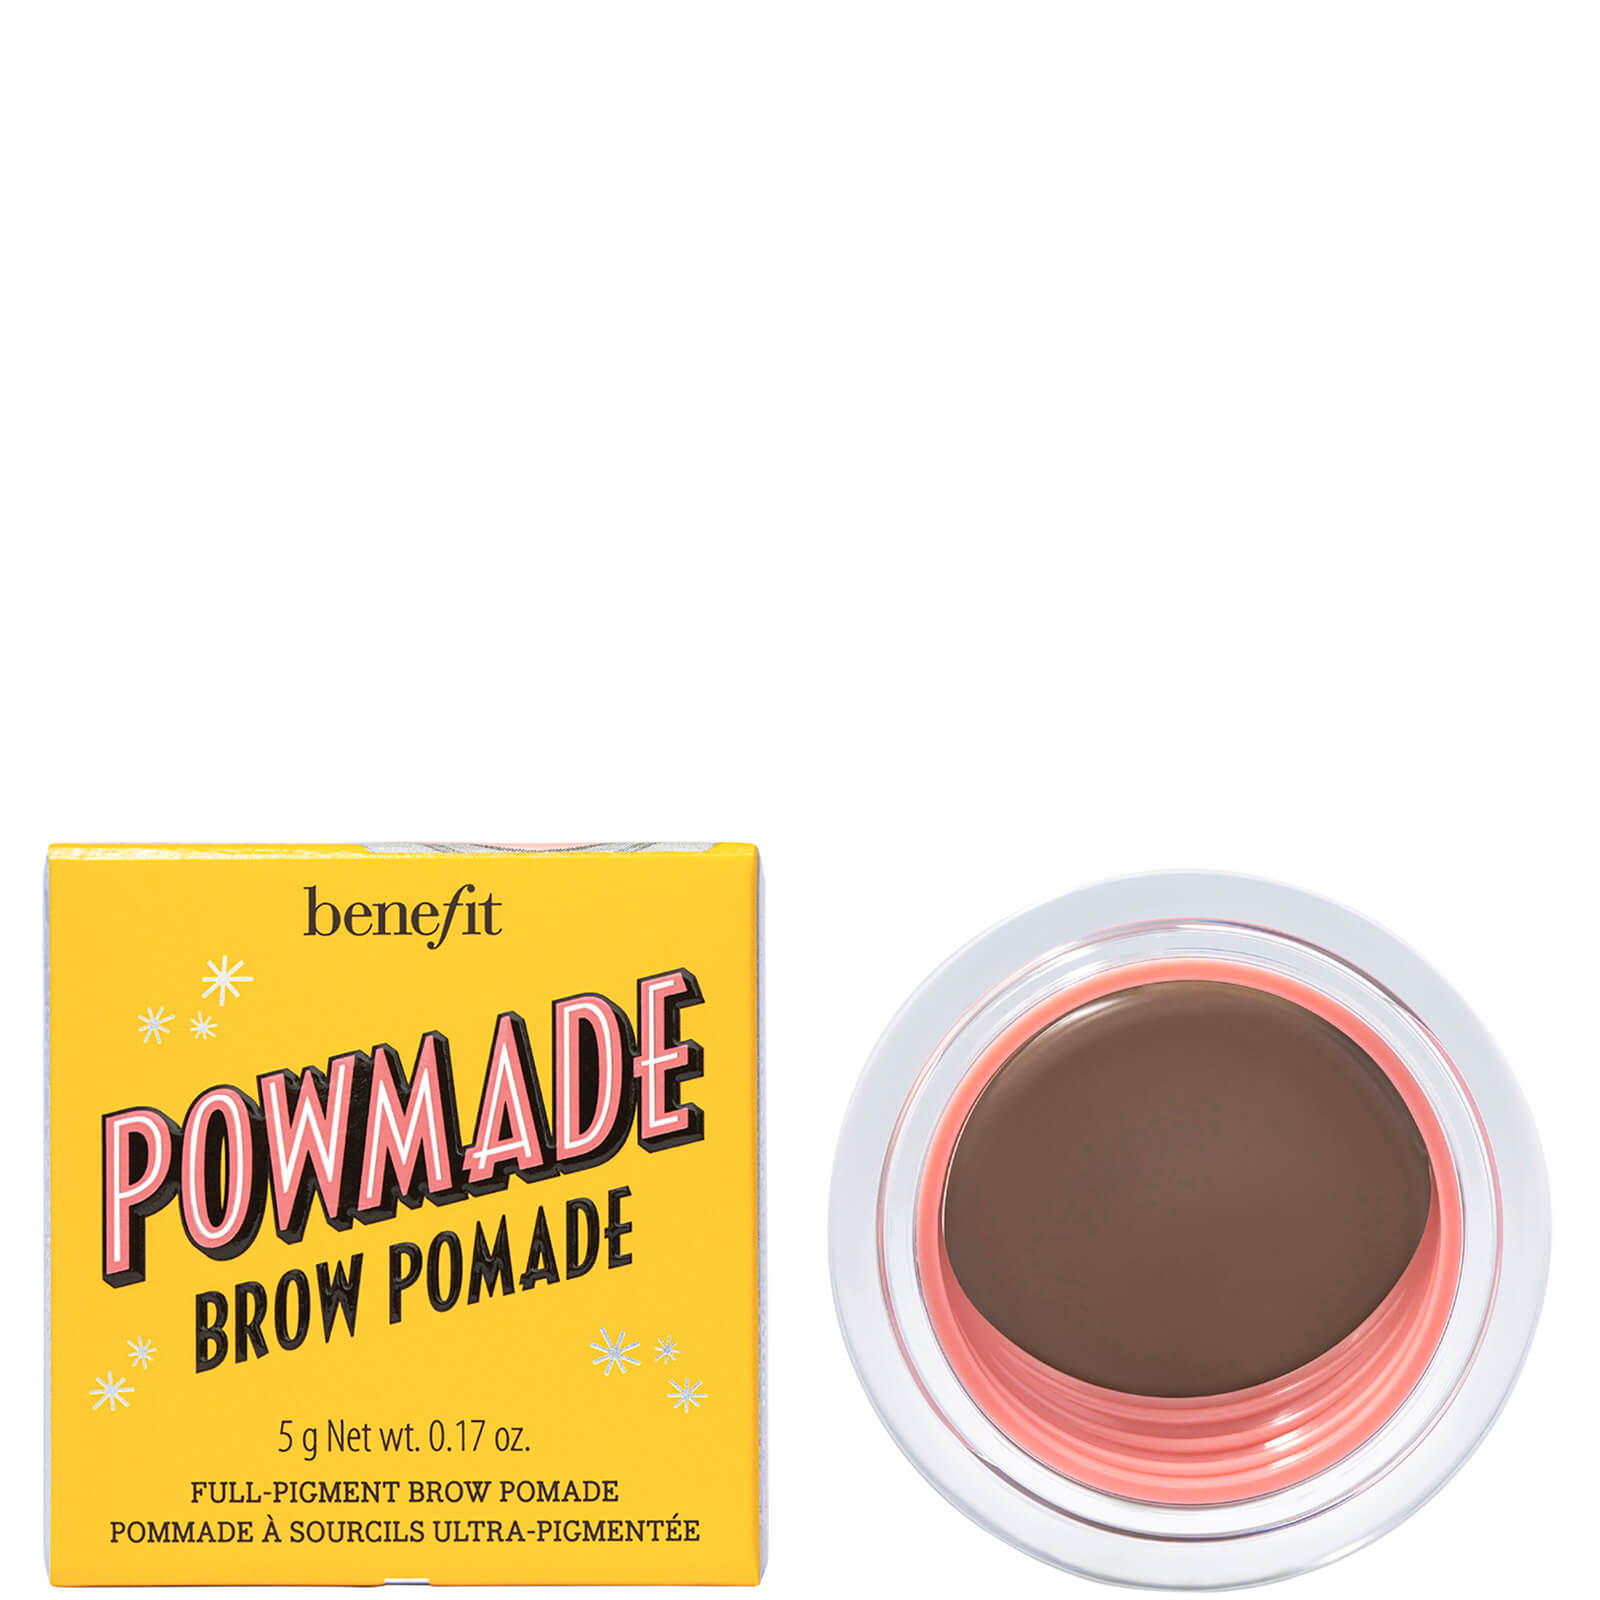 benefit Powmade Full Pigment Eyebrow Pomade 5g (Various Shades) - 3 Warm Light Brown